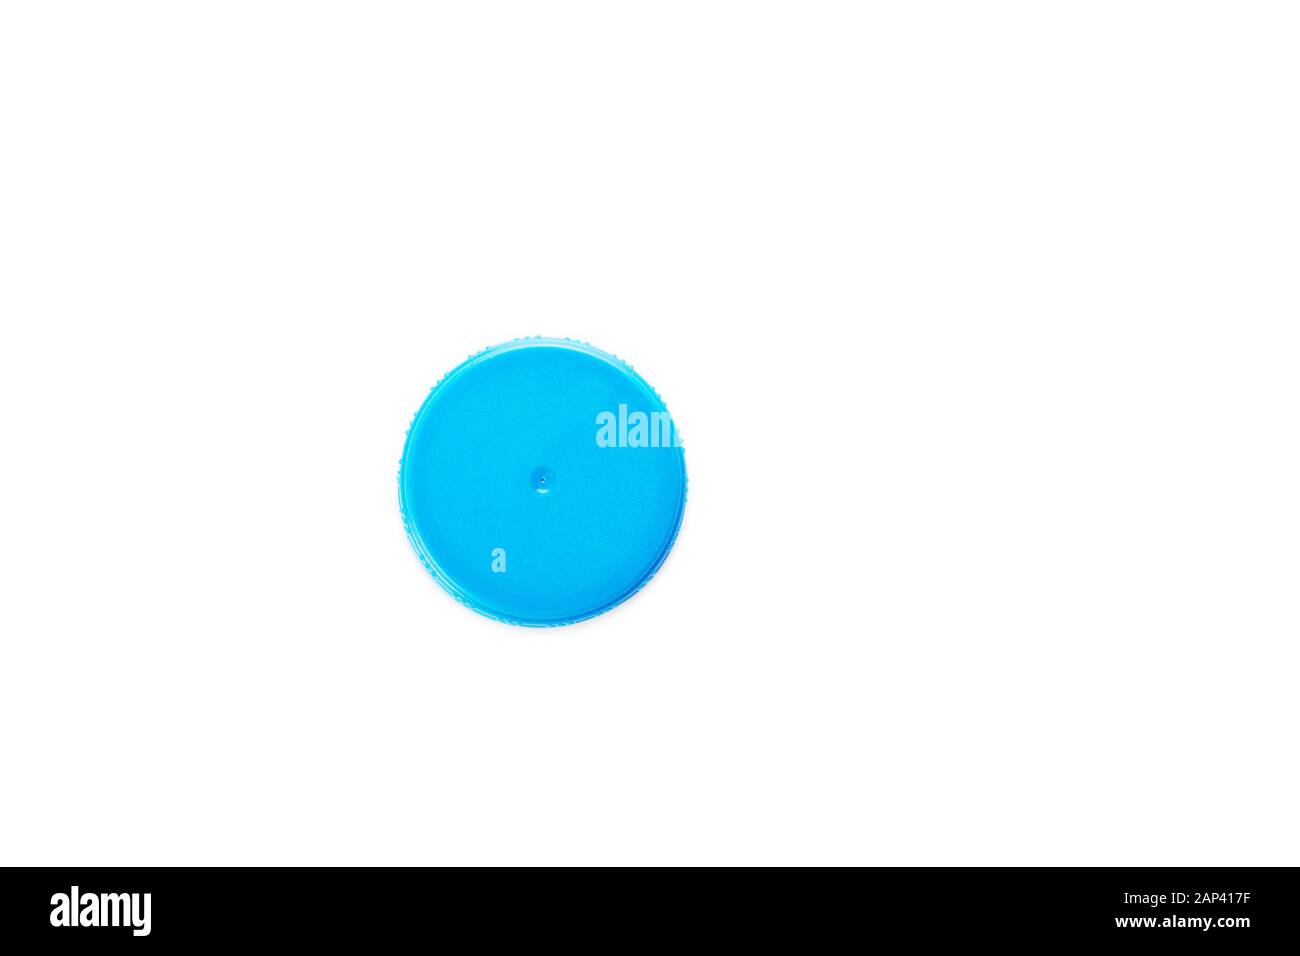 Blue Plastic Bottle Cover On White Background Top View Stock Photo Alamy